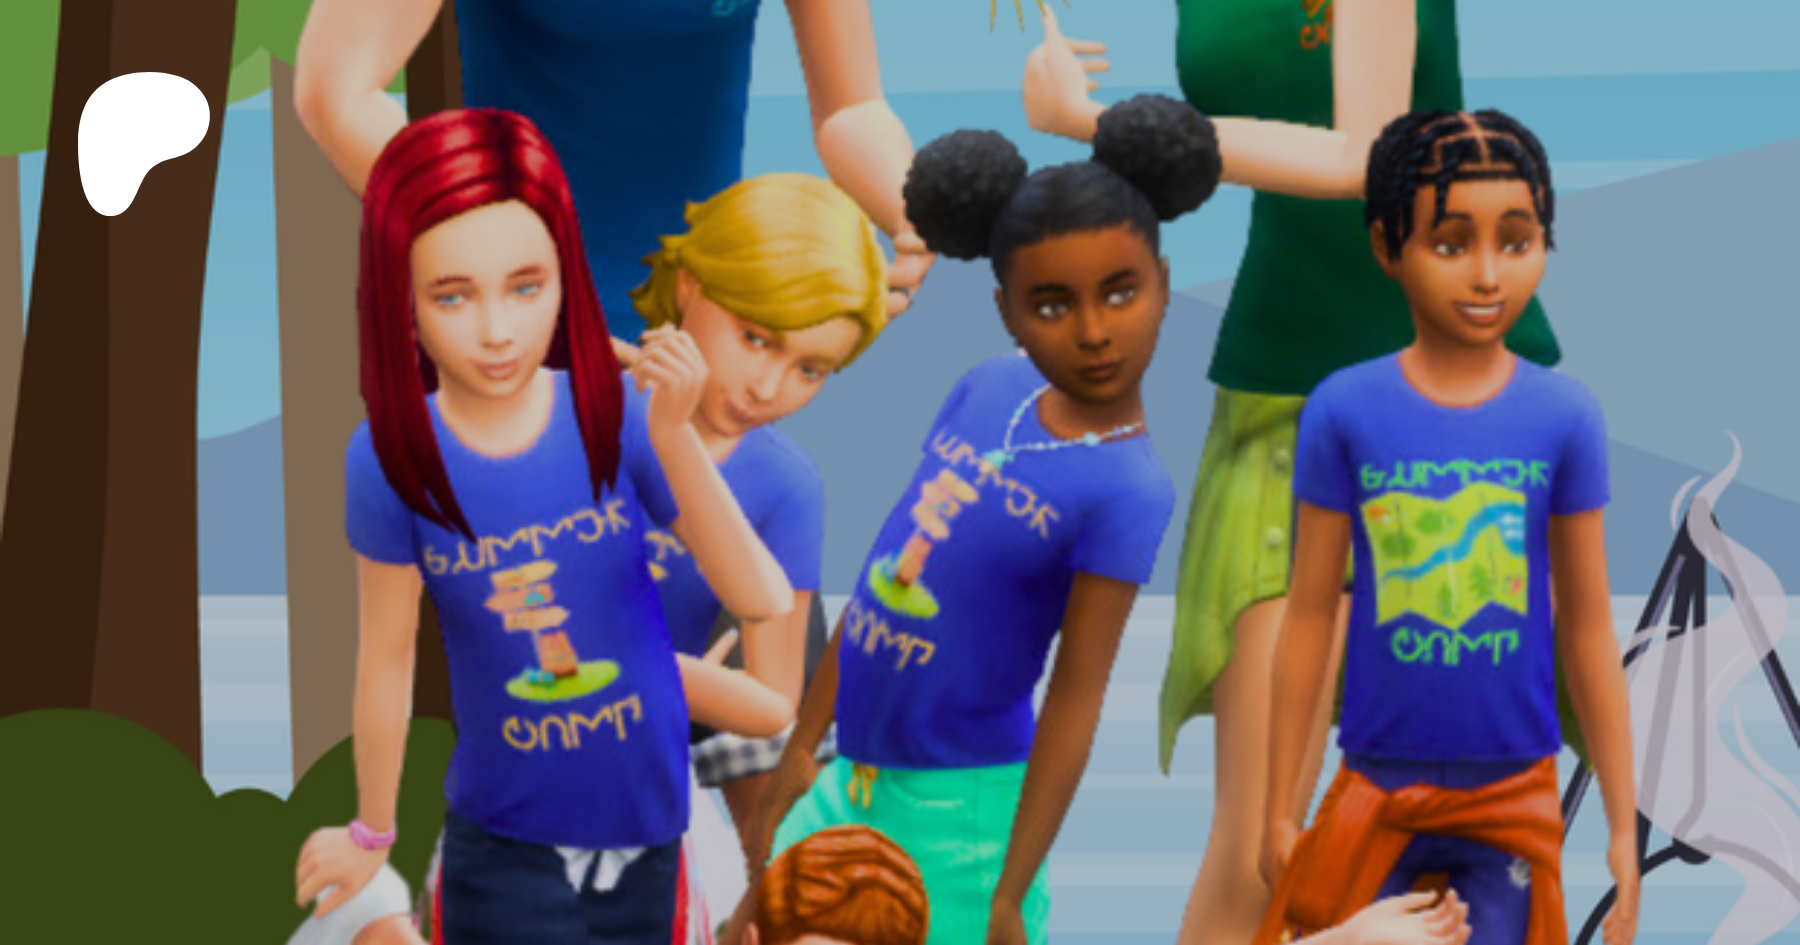 The Sims 4 Mods on Curseforge – Platinum Simmers